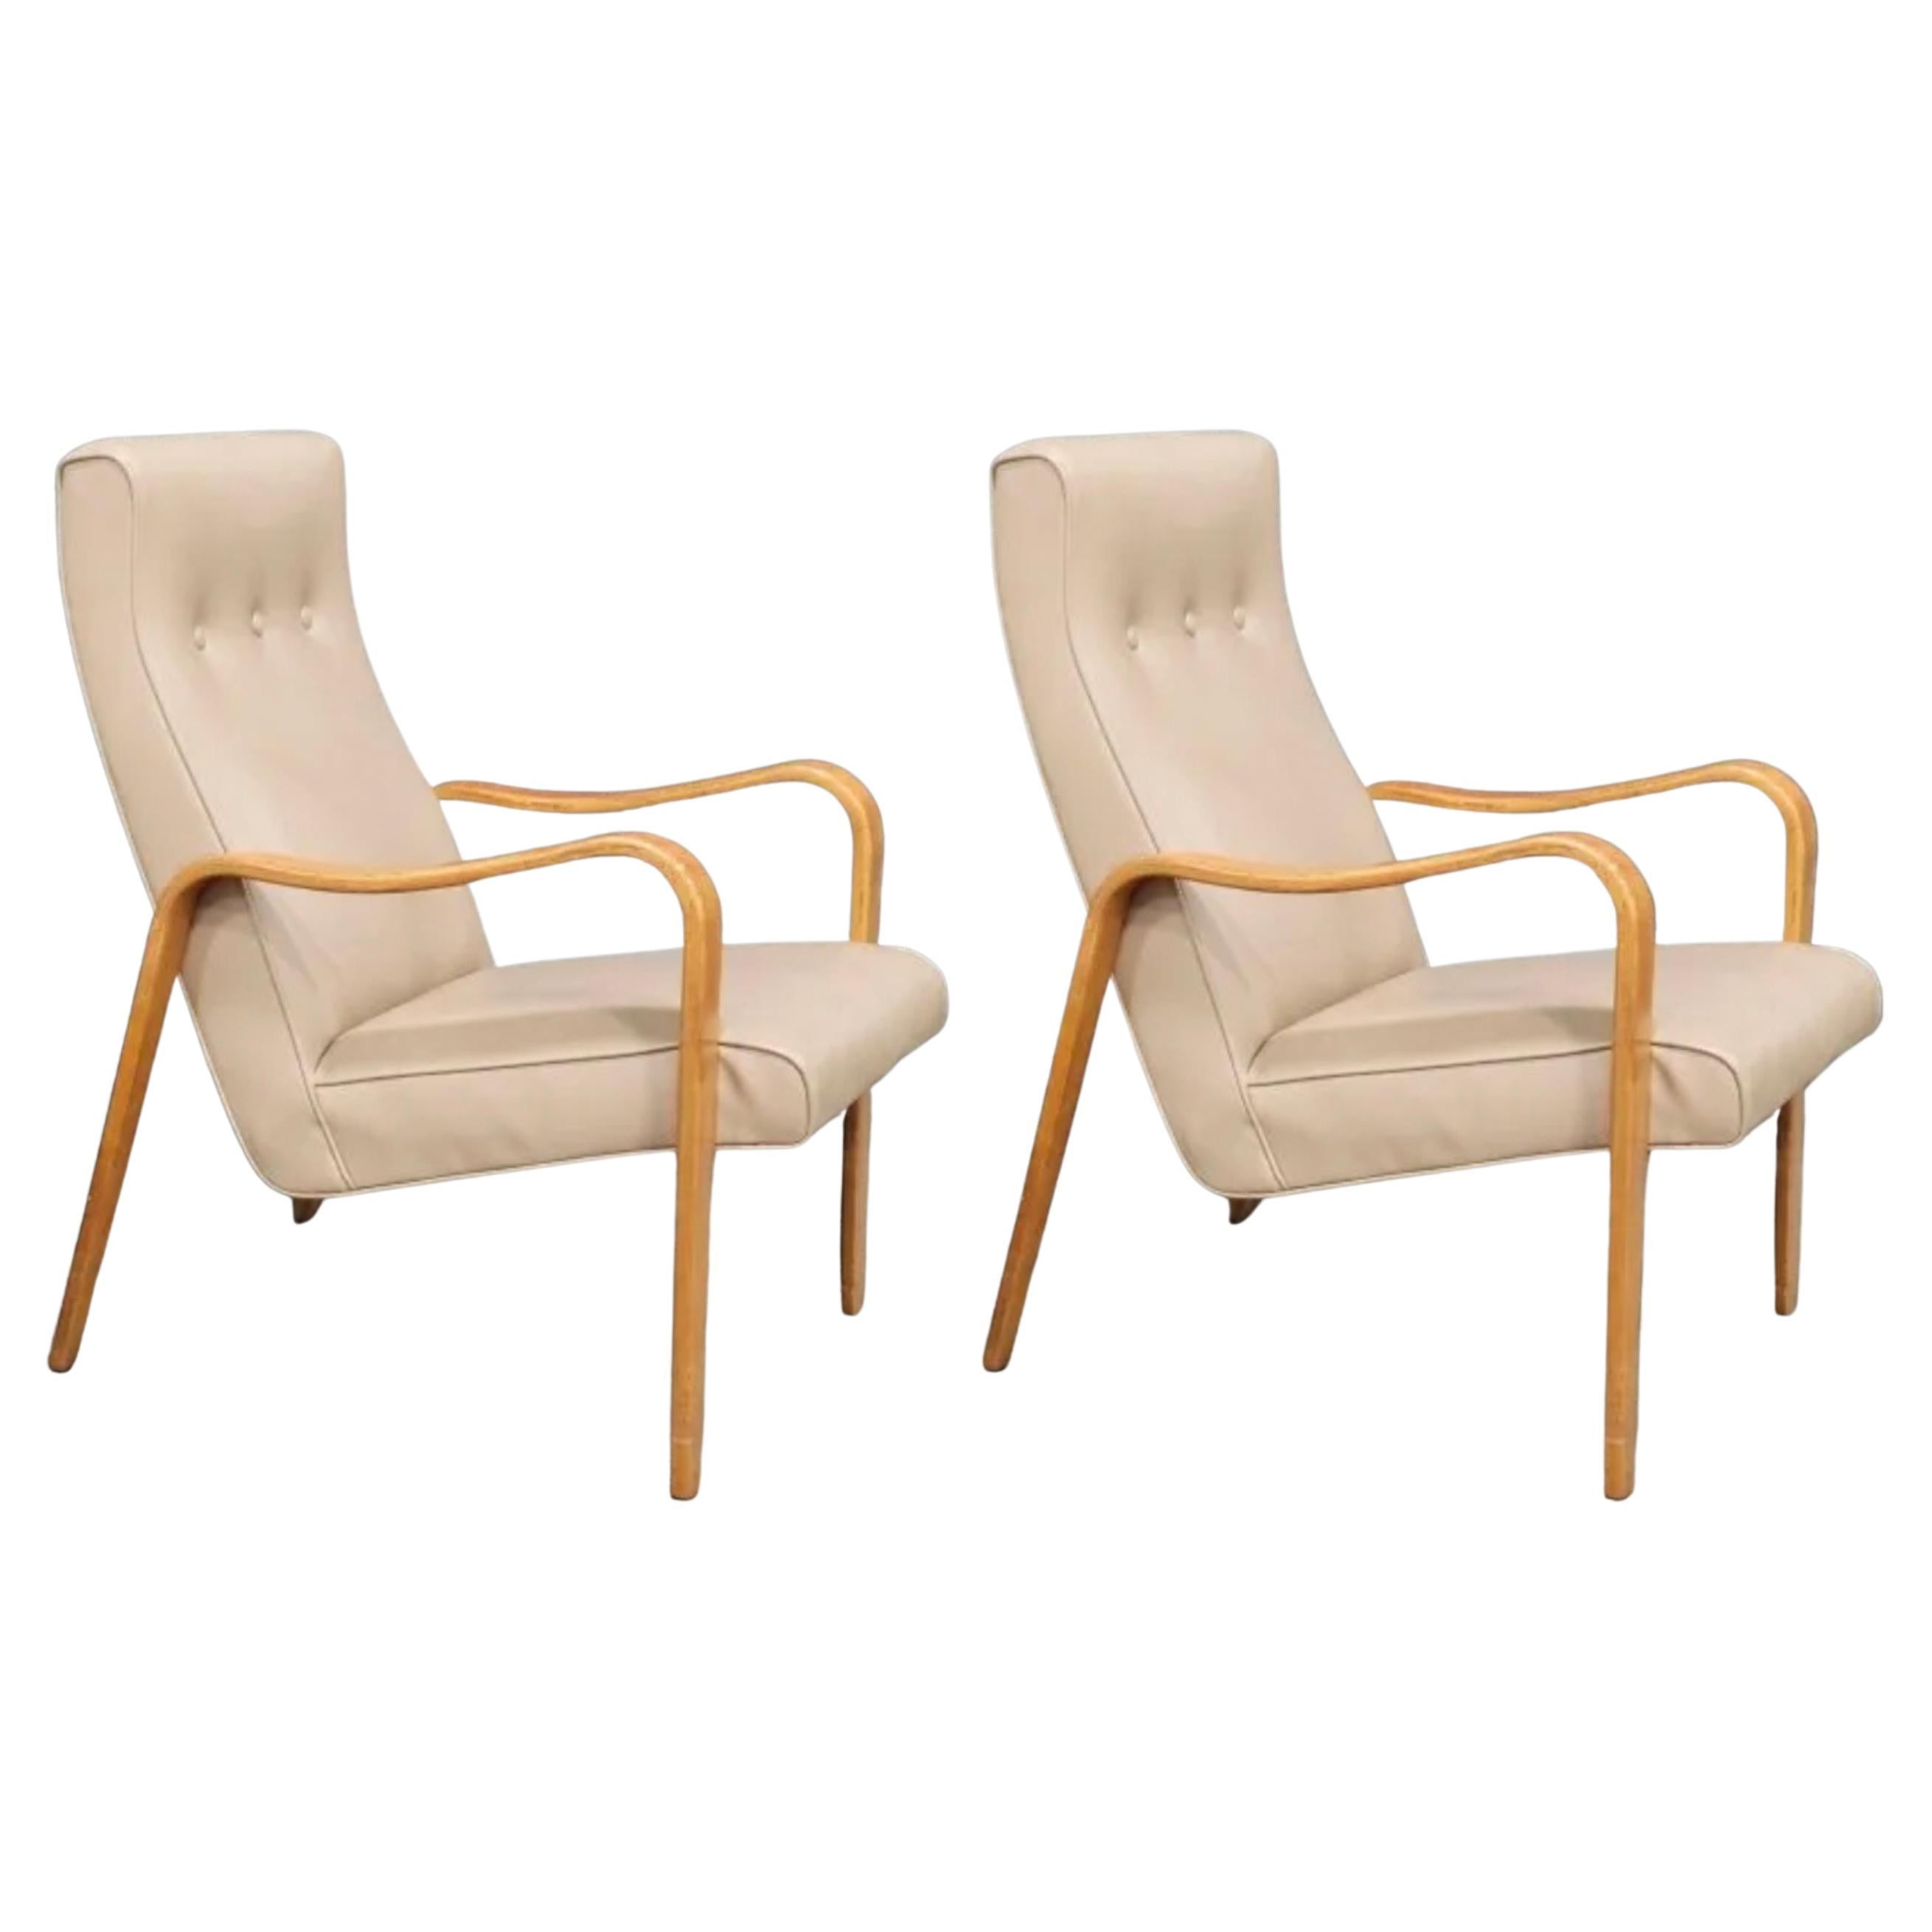 Pair of Mid-Century Modern Thonet Bentwood Birch Lounge Arm Chairs Tan For Sale